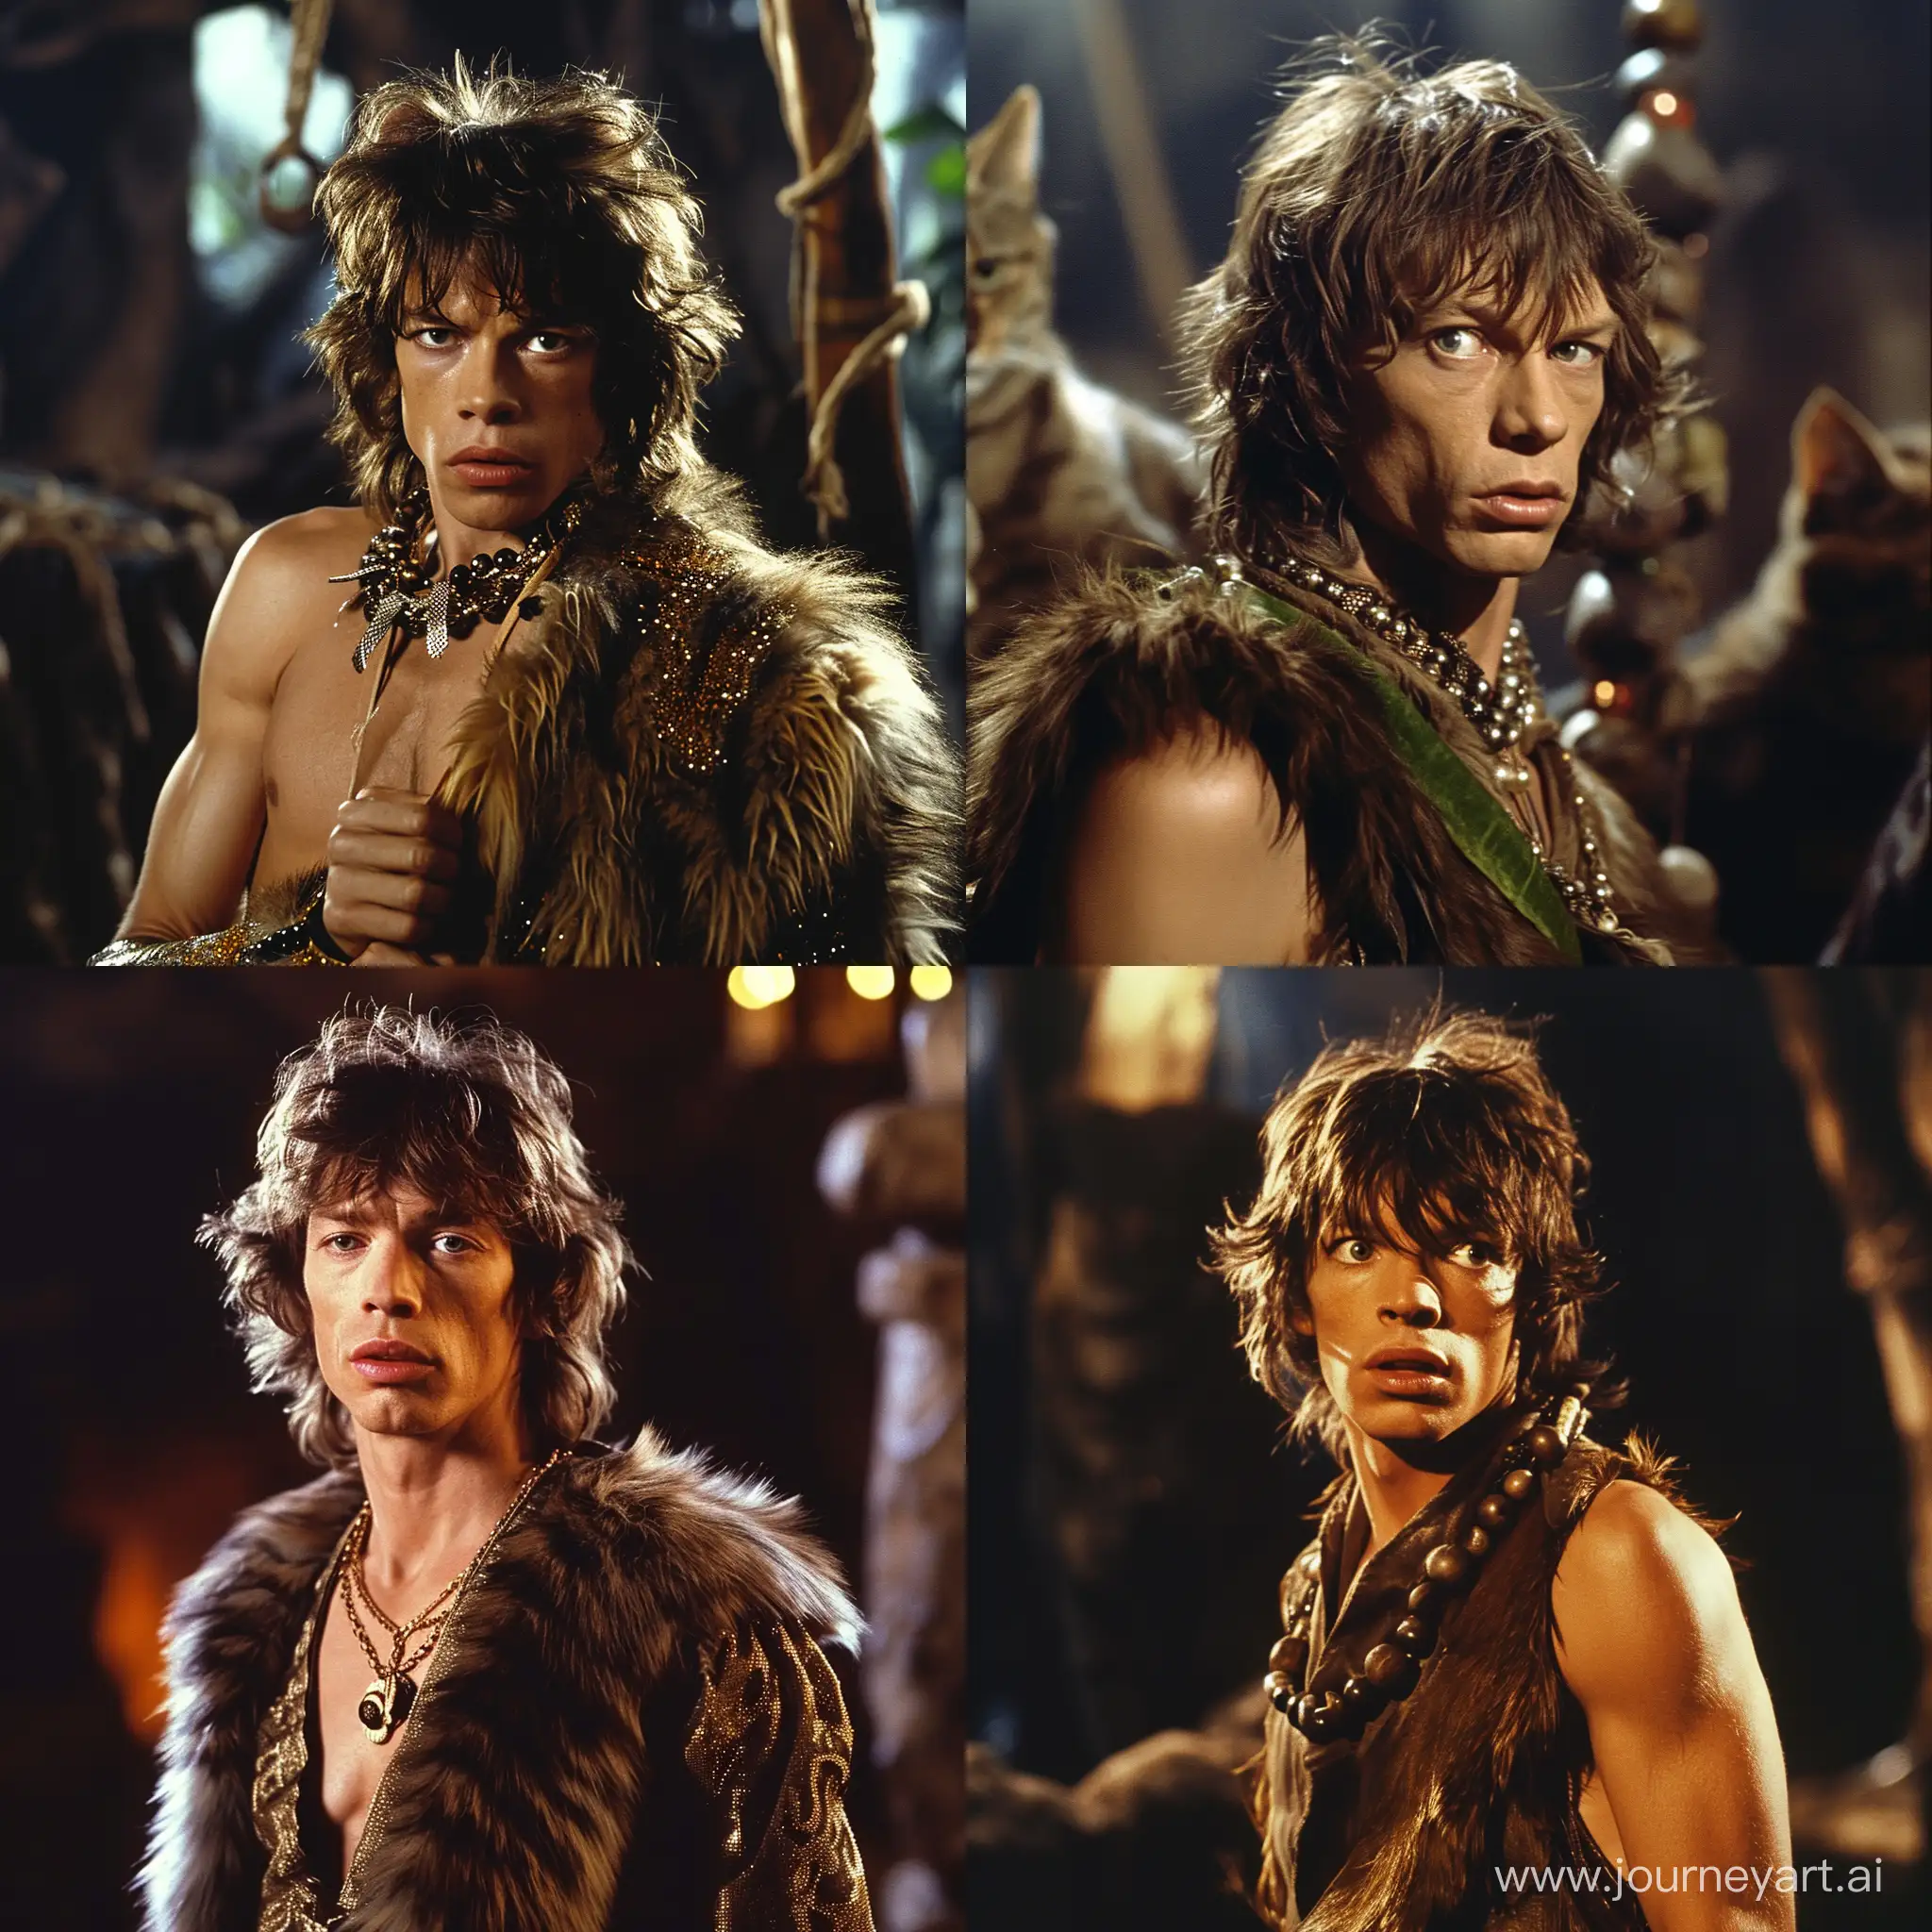 Mick-Jagger-Fantasy-Movie-Portrait-with-CatLike-Features